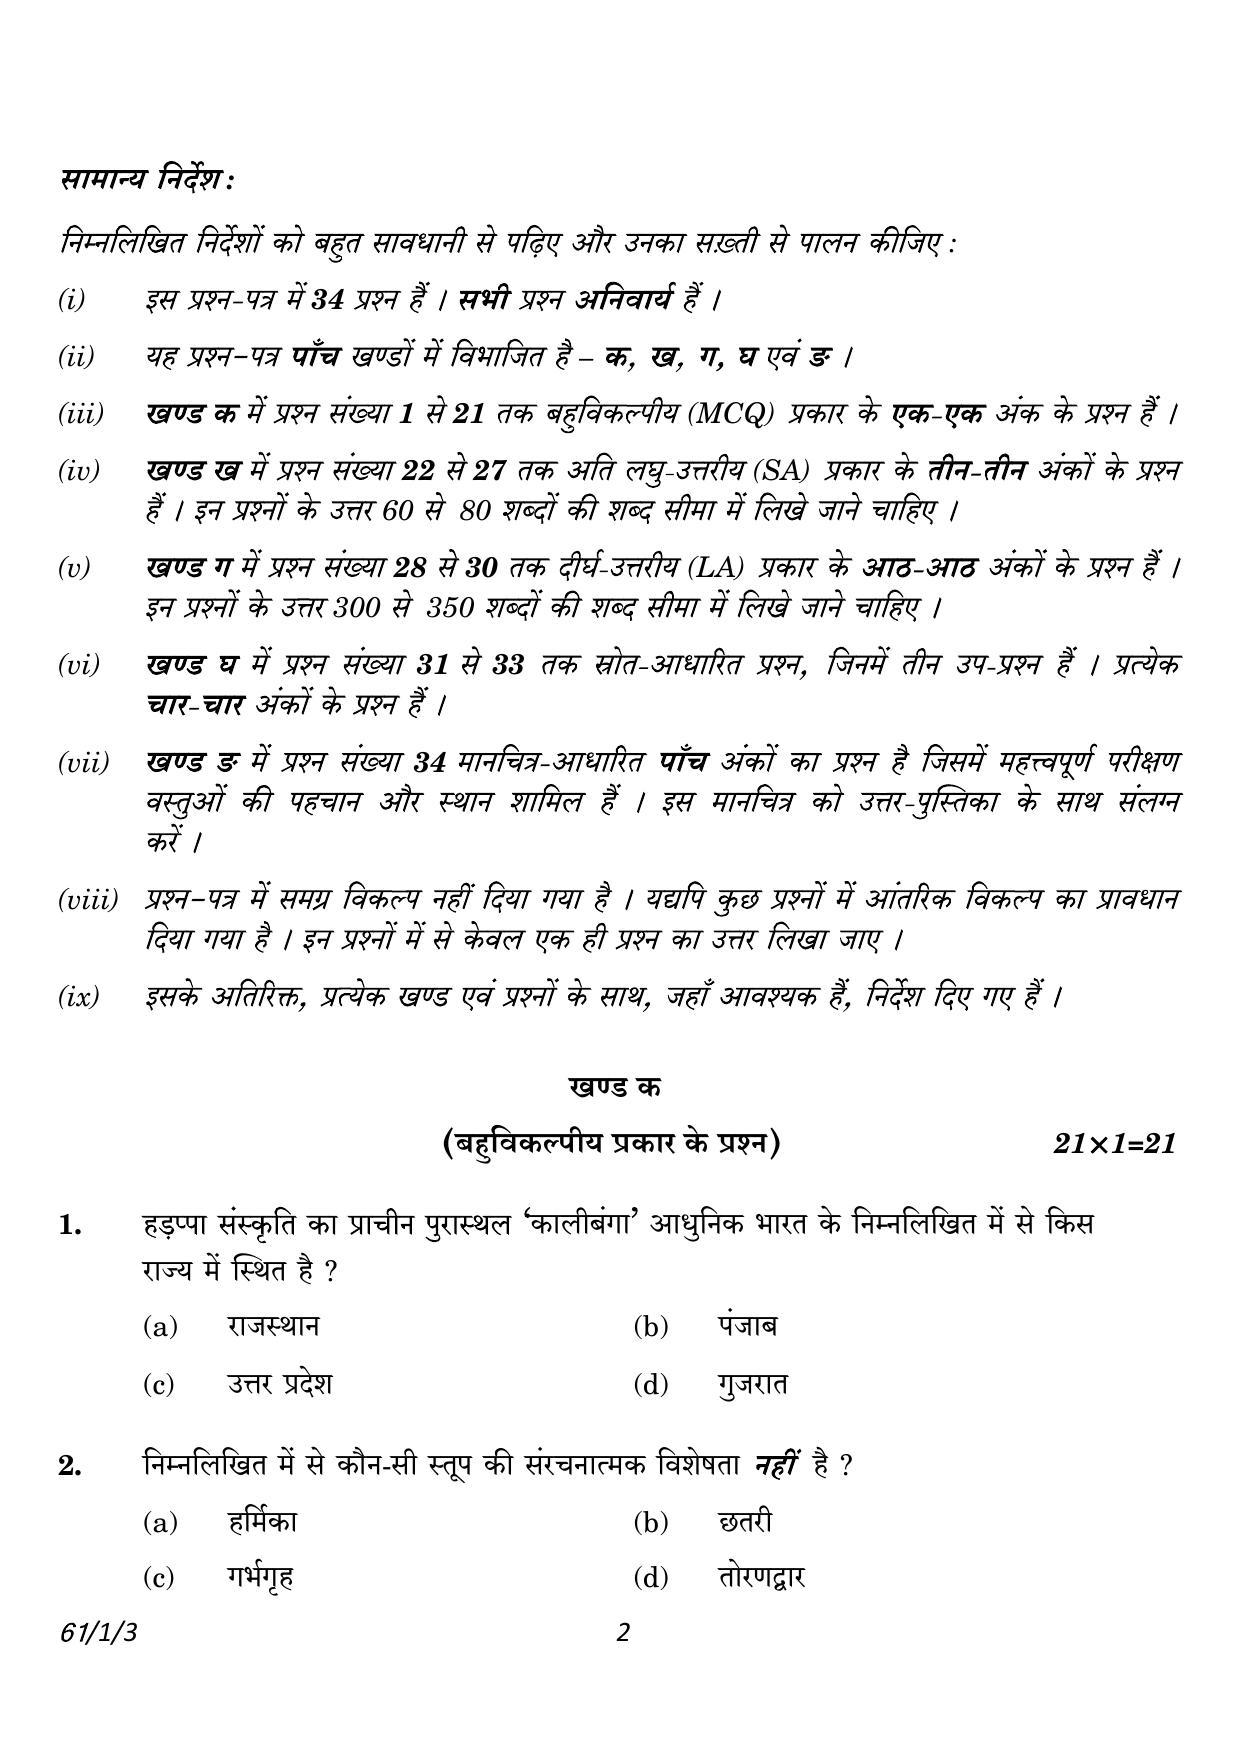 CBSE Class 12 61-1-3 History 2023 Question Paper - Page 2